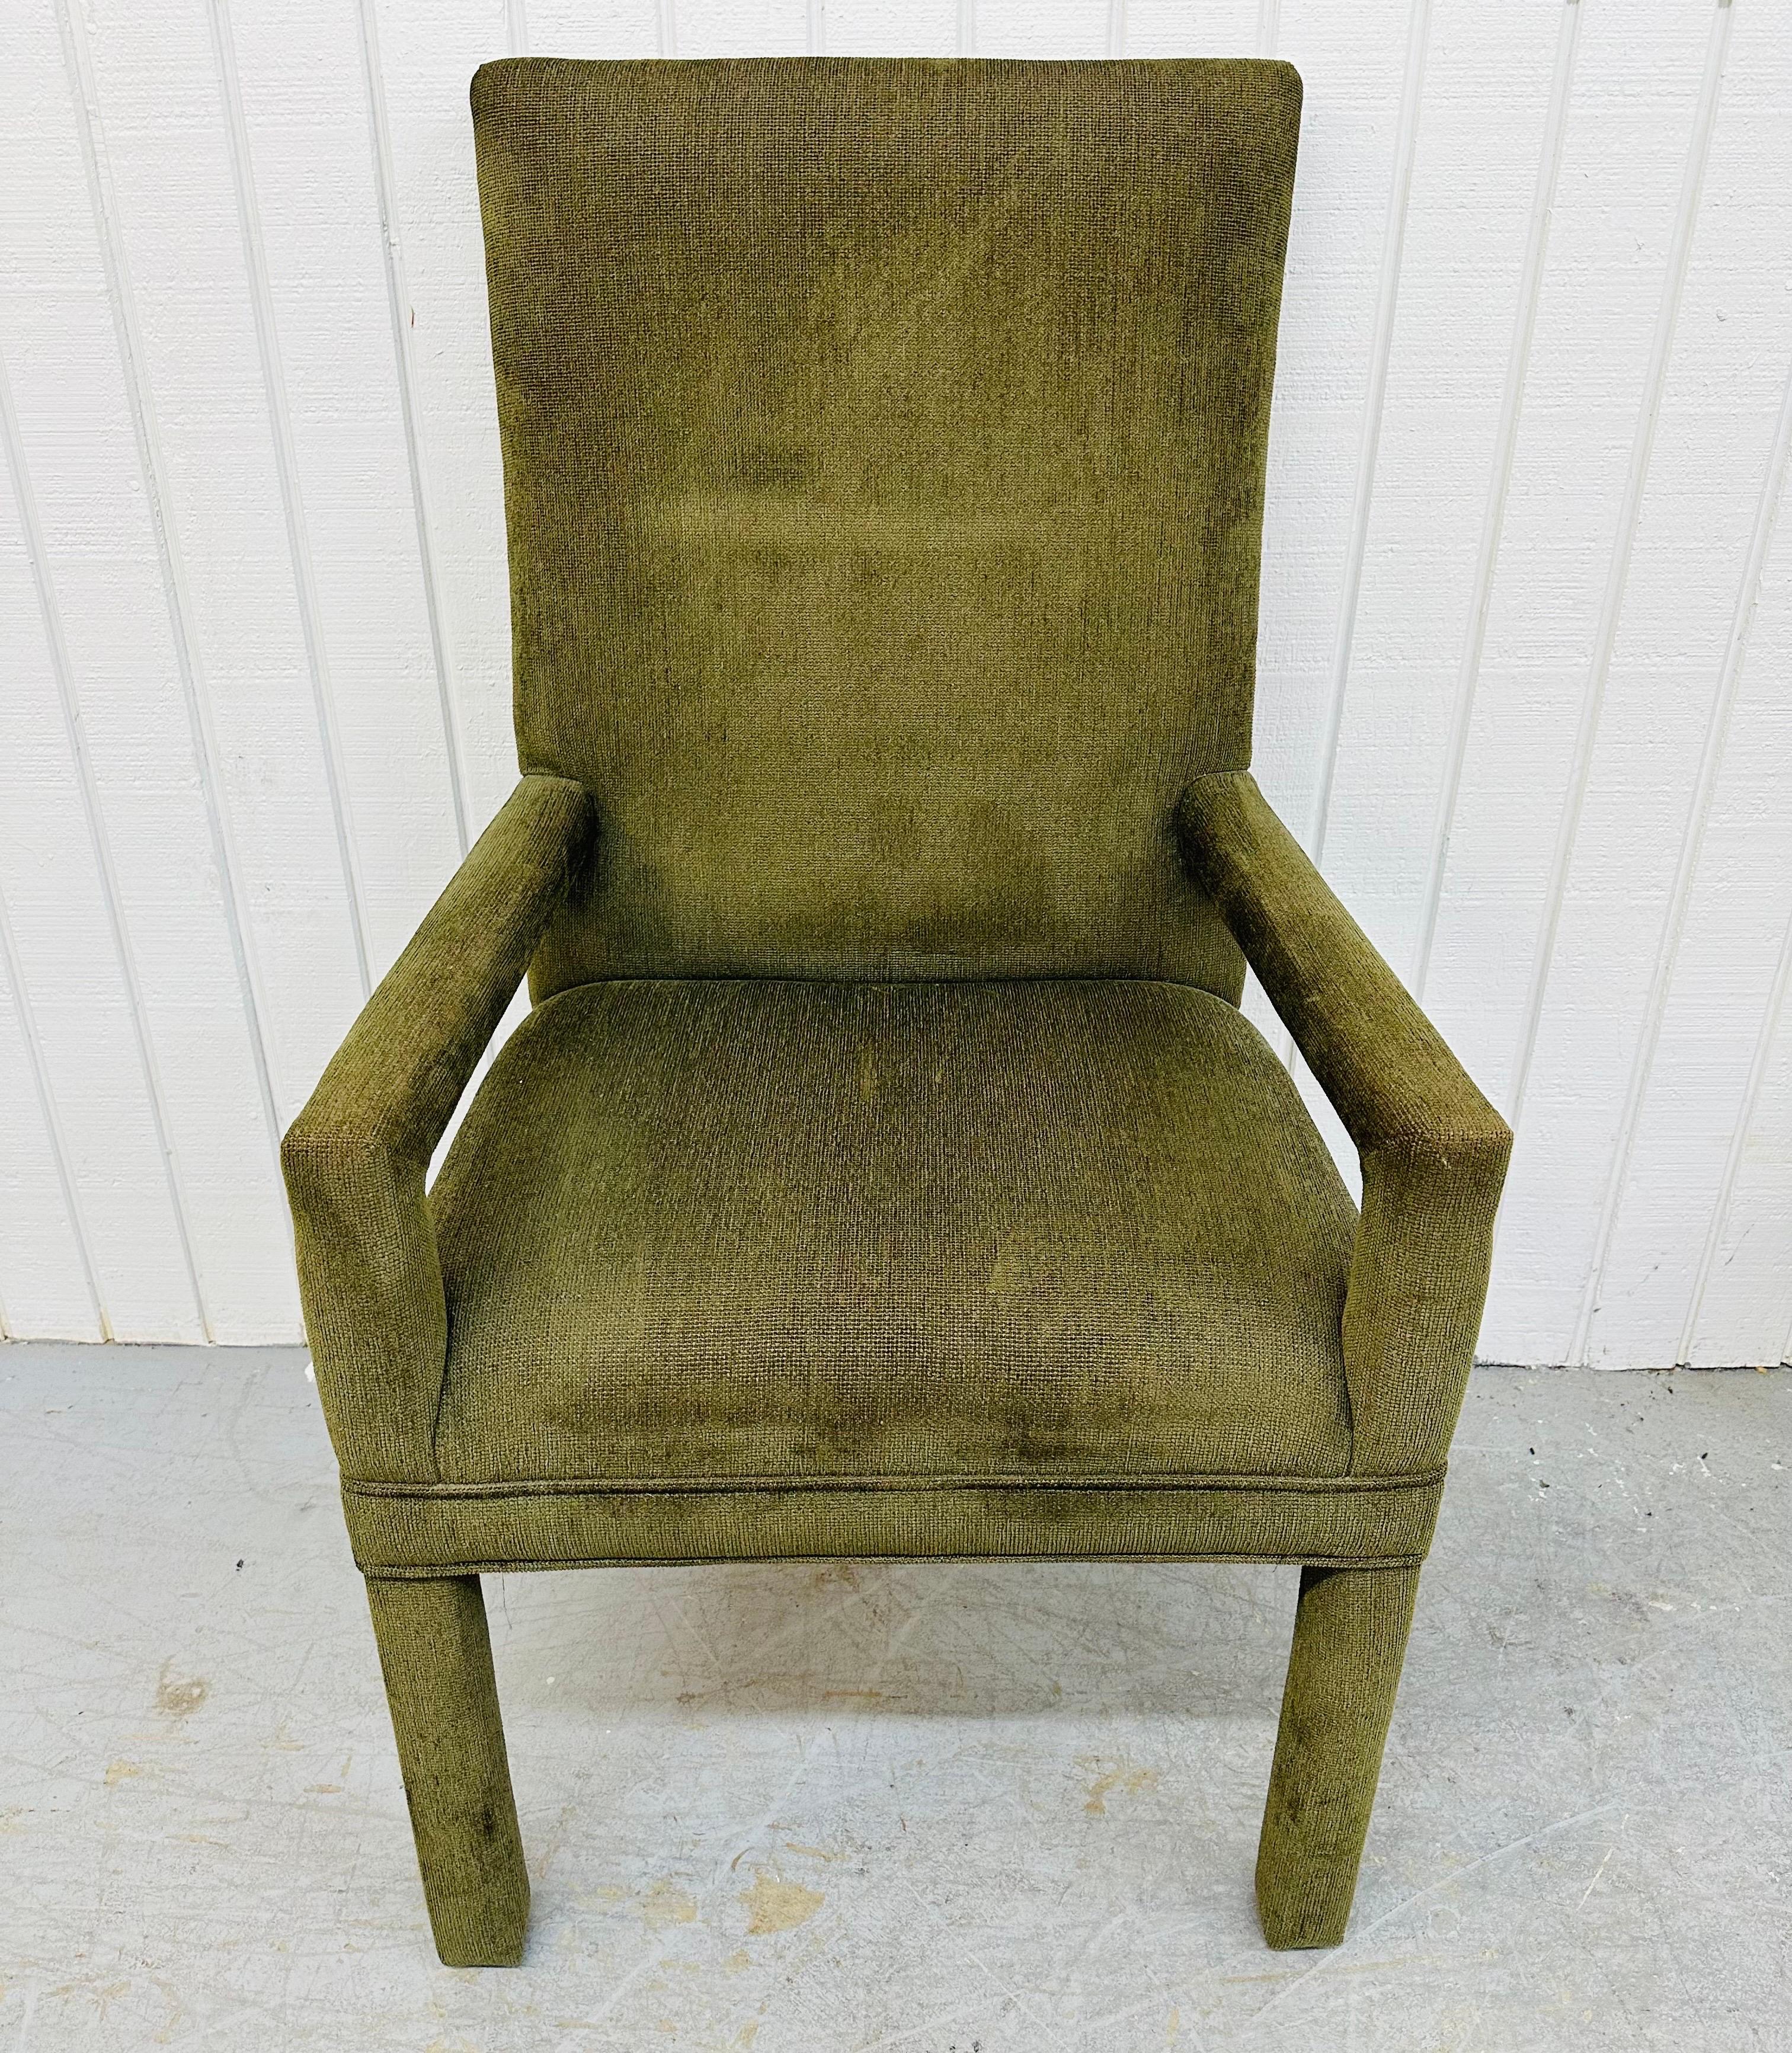 This listing is for a set of eight Post Modern Green Upholstered Brass Dining Chairs. Featuring a straight line high-back design, two fully upholstered arm chairs, six straight chairs with brass legs, and an original green upholstery. This is an